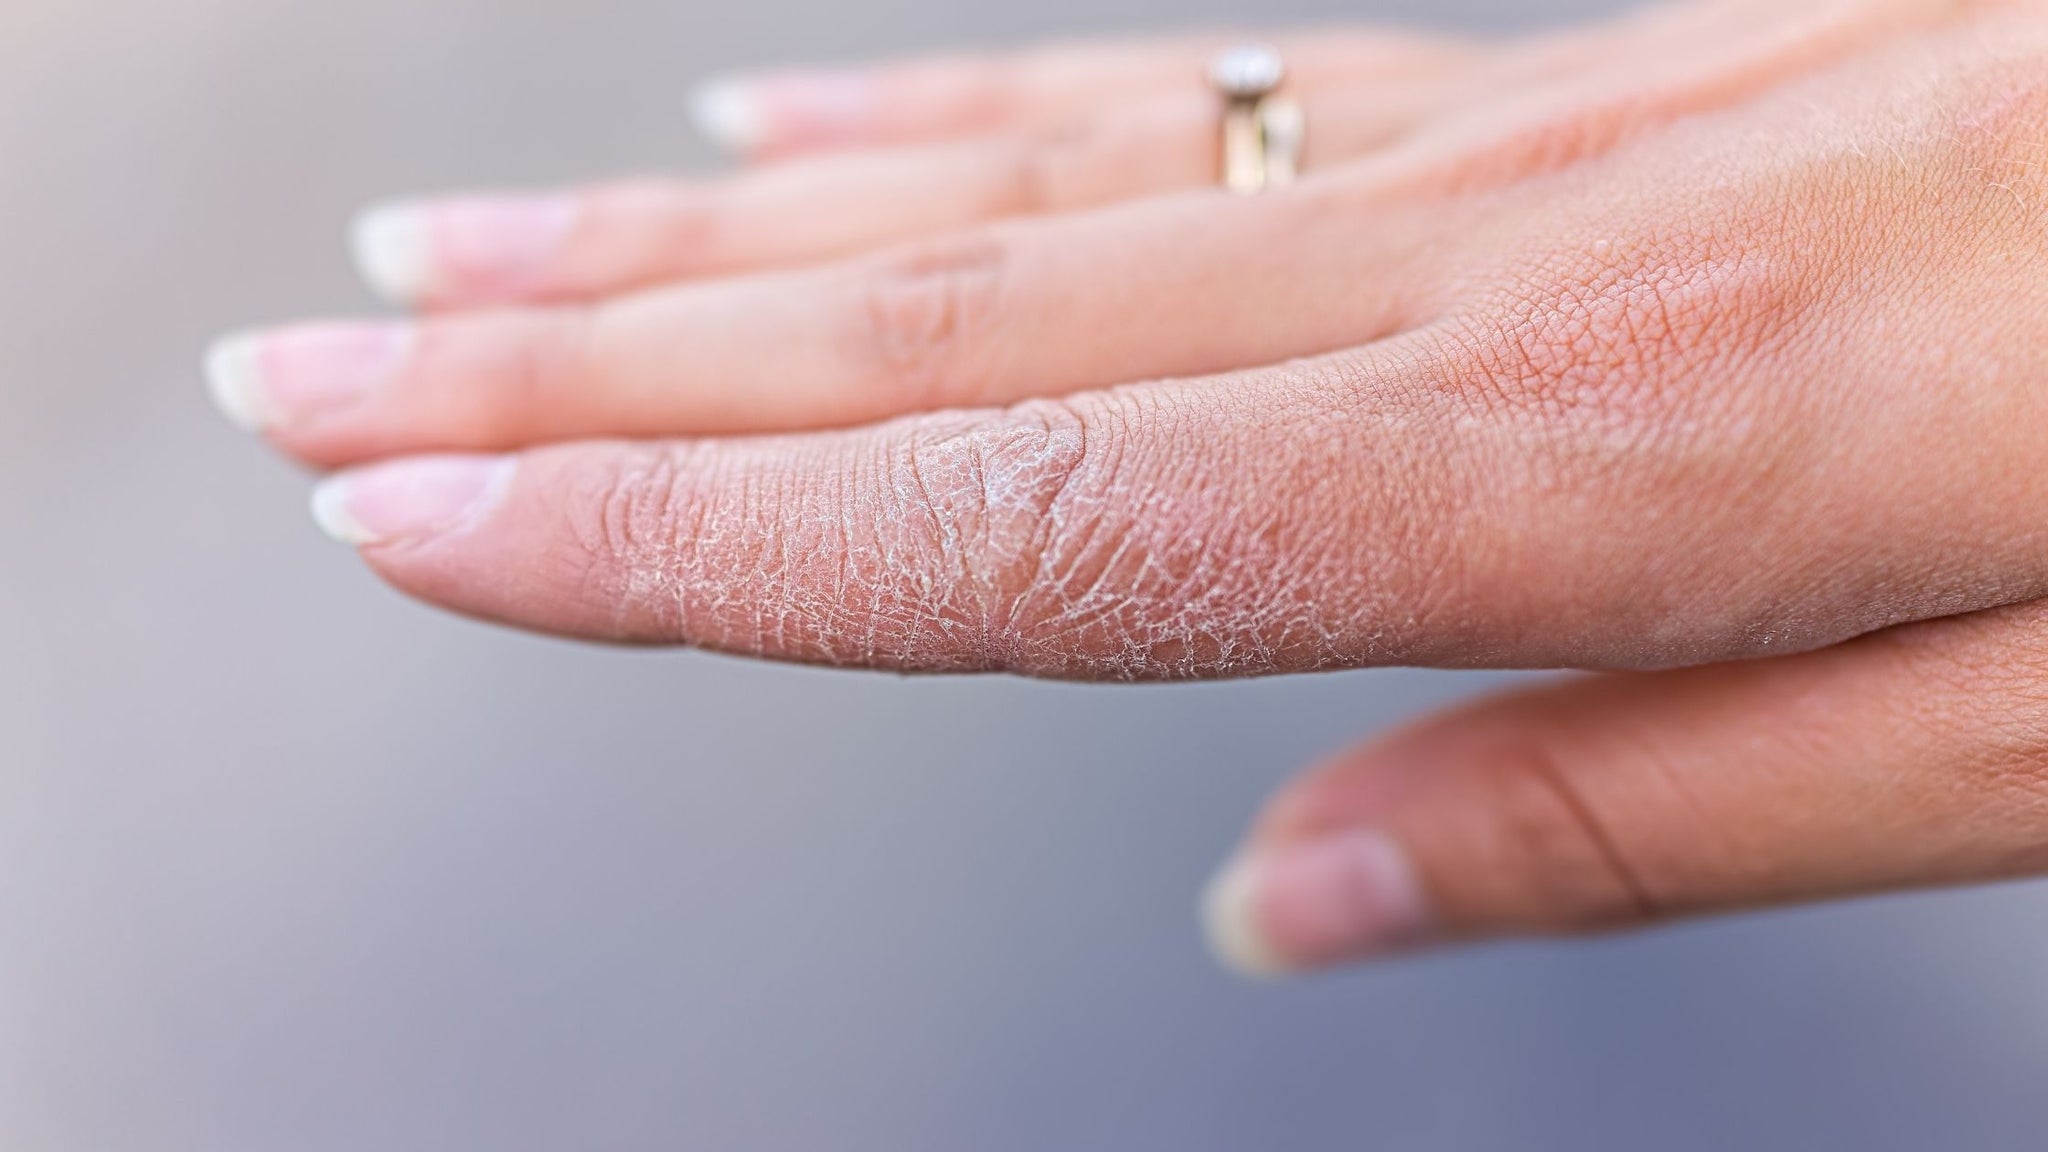 How To Get Rid Of Dry Hands? Causes & Treatment